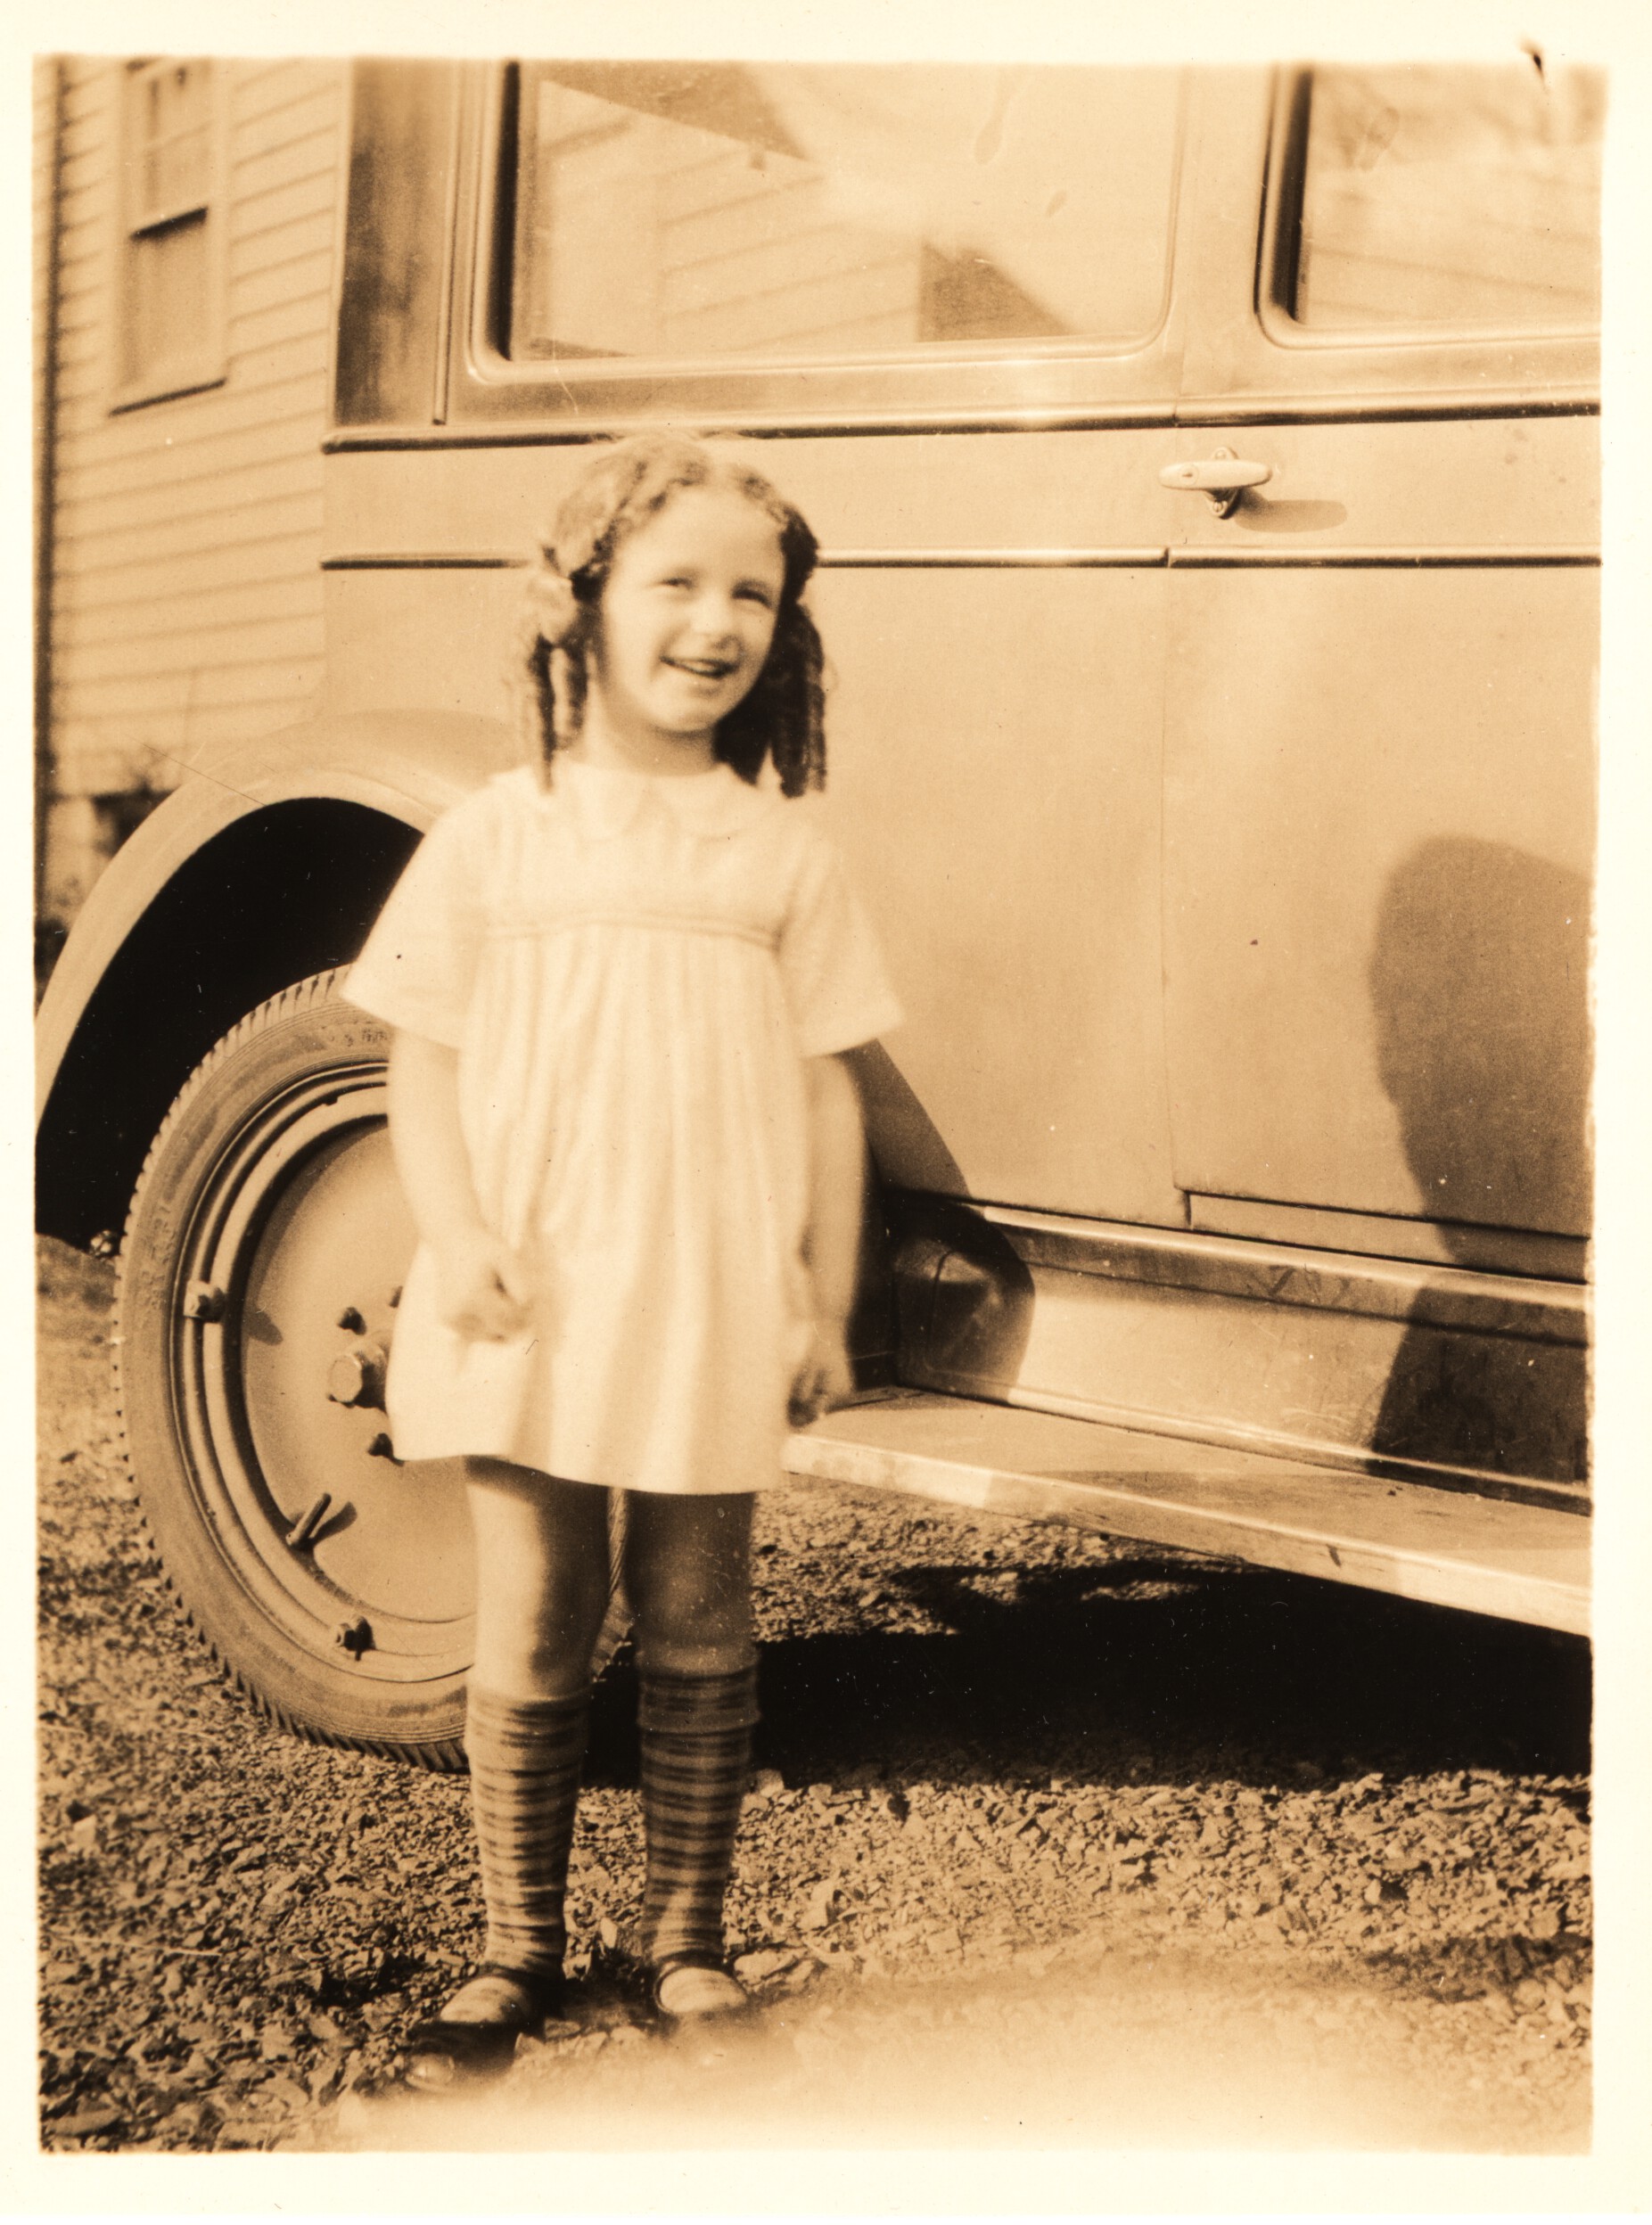 A young girl standing next to a car in the late 1920's/early 1930's